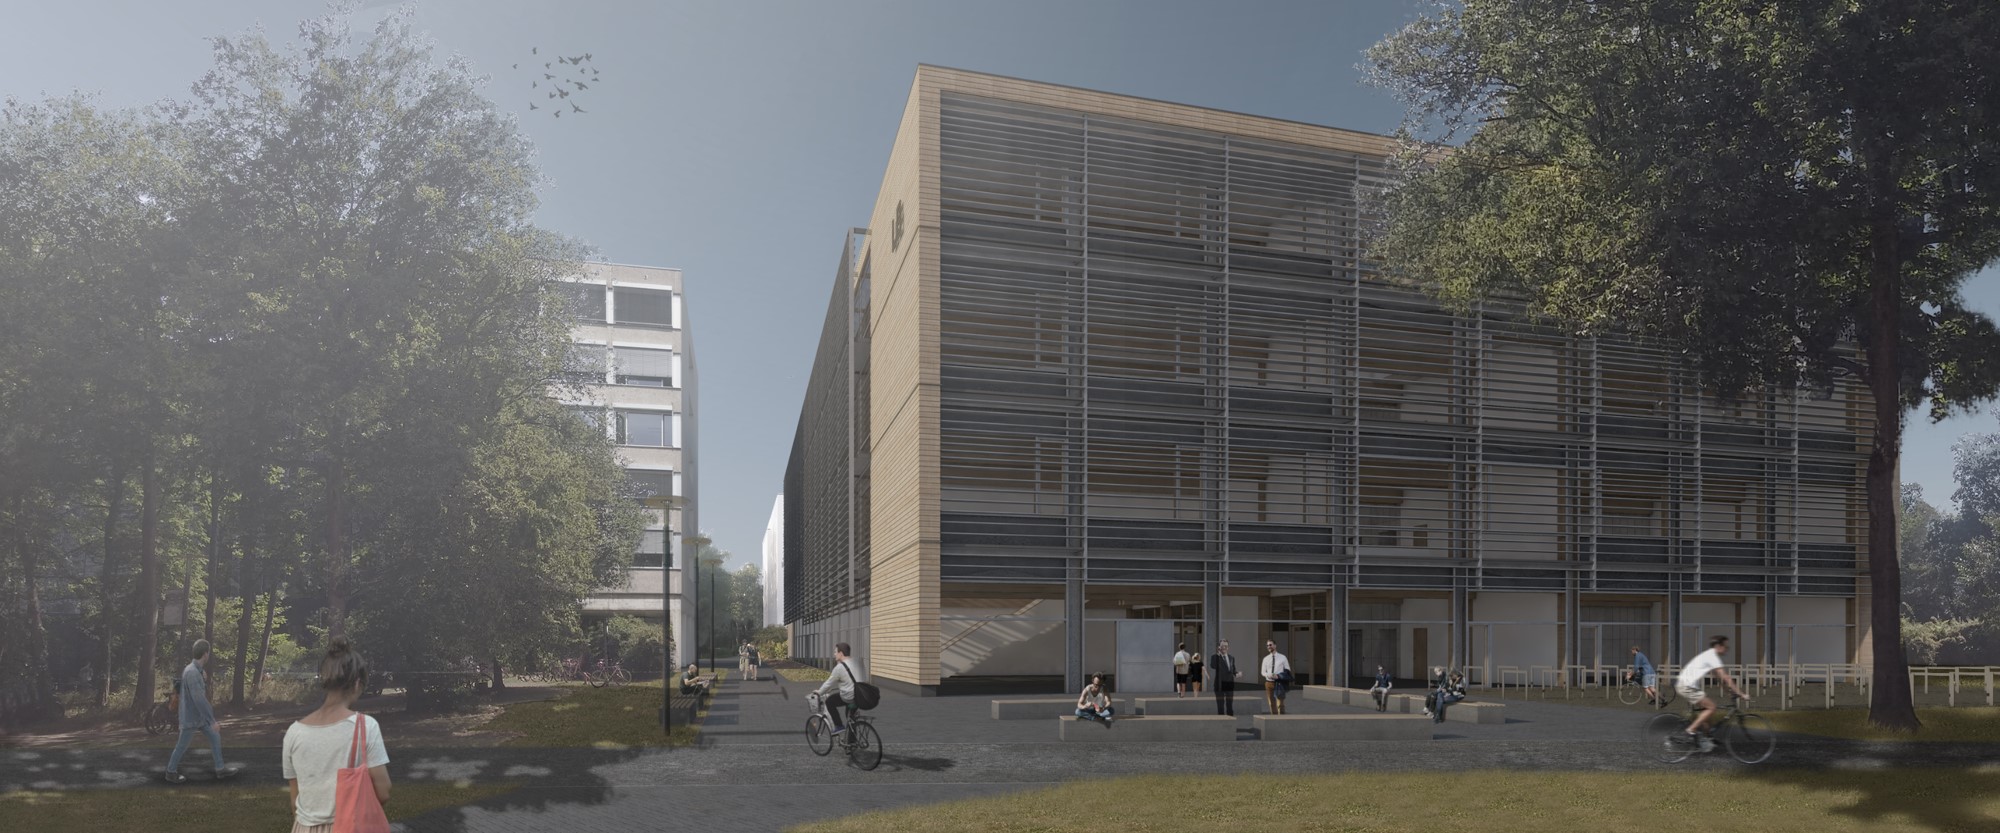 student project draft of a climate-friendly campus building